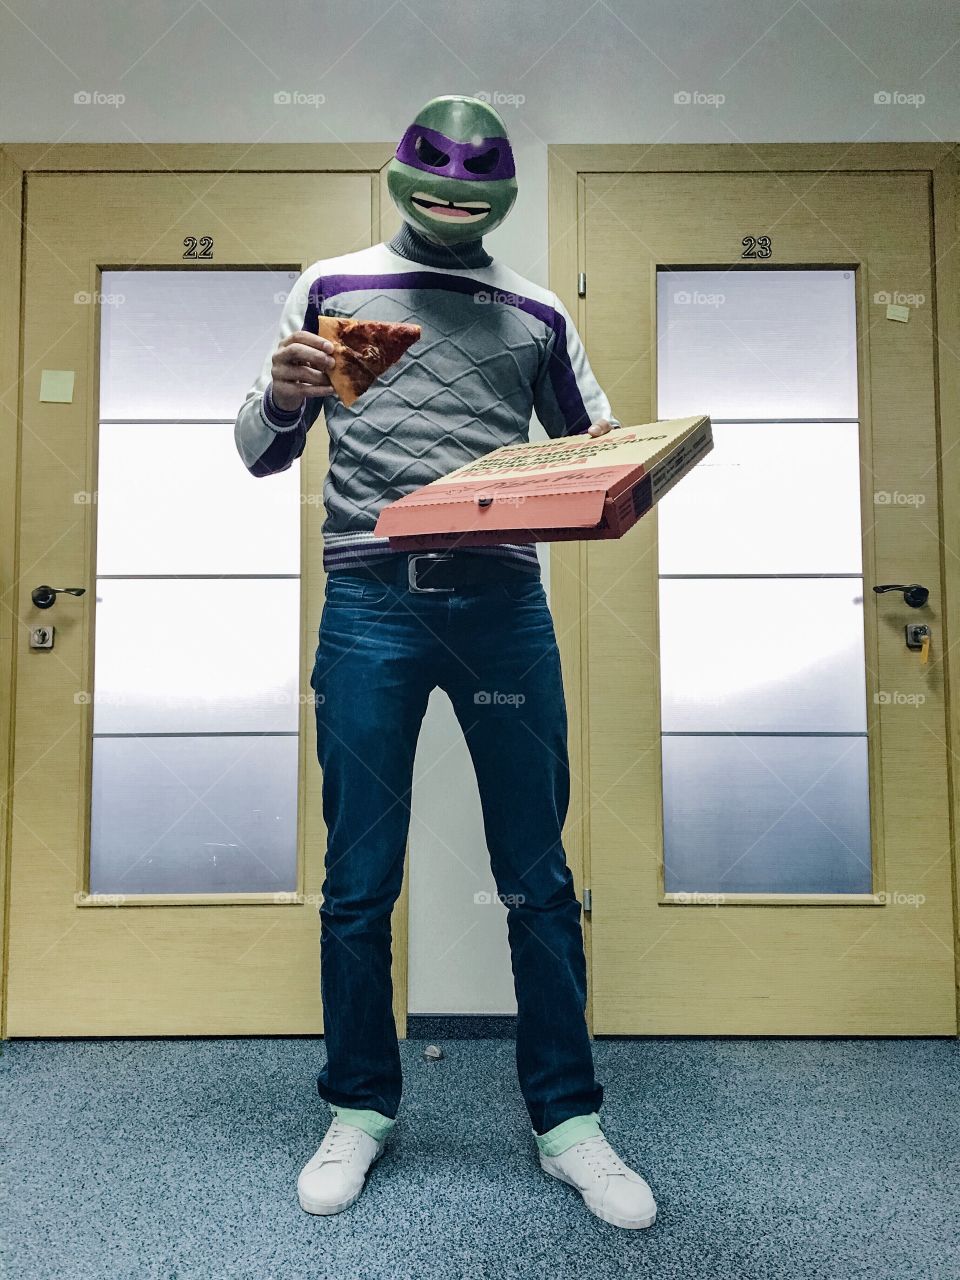 Man in mask of ninja turtle from TMNT with pizza box in office